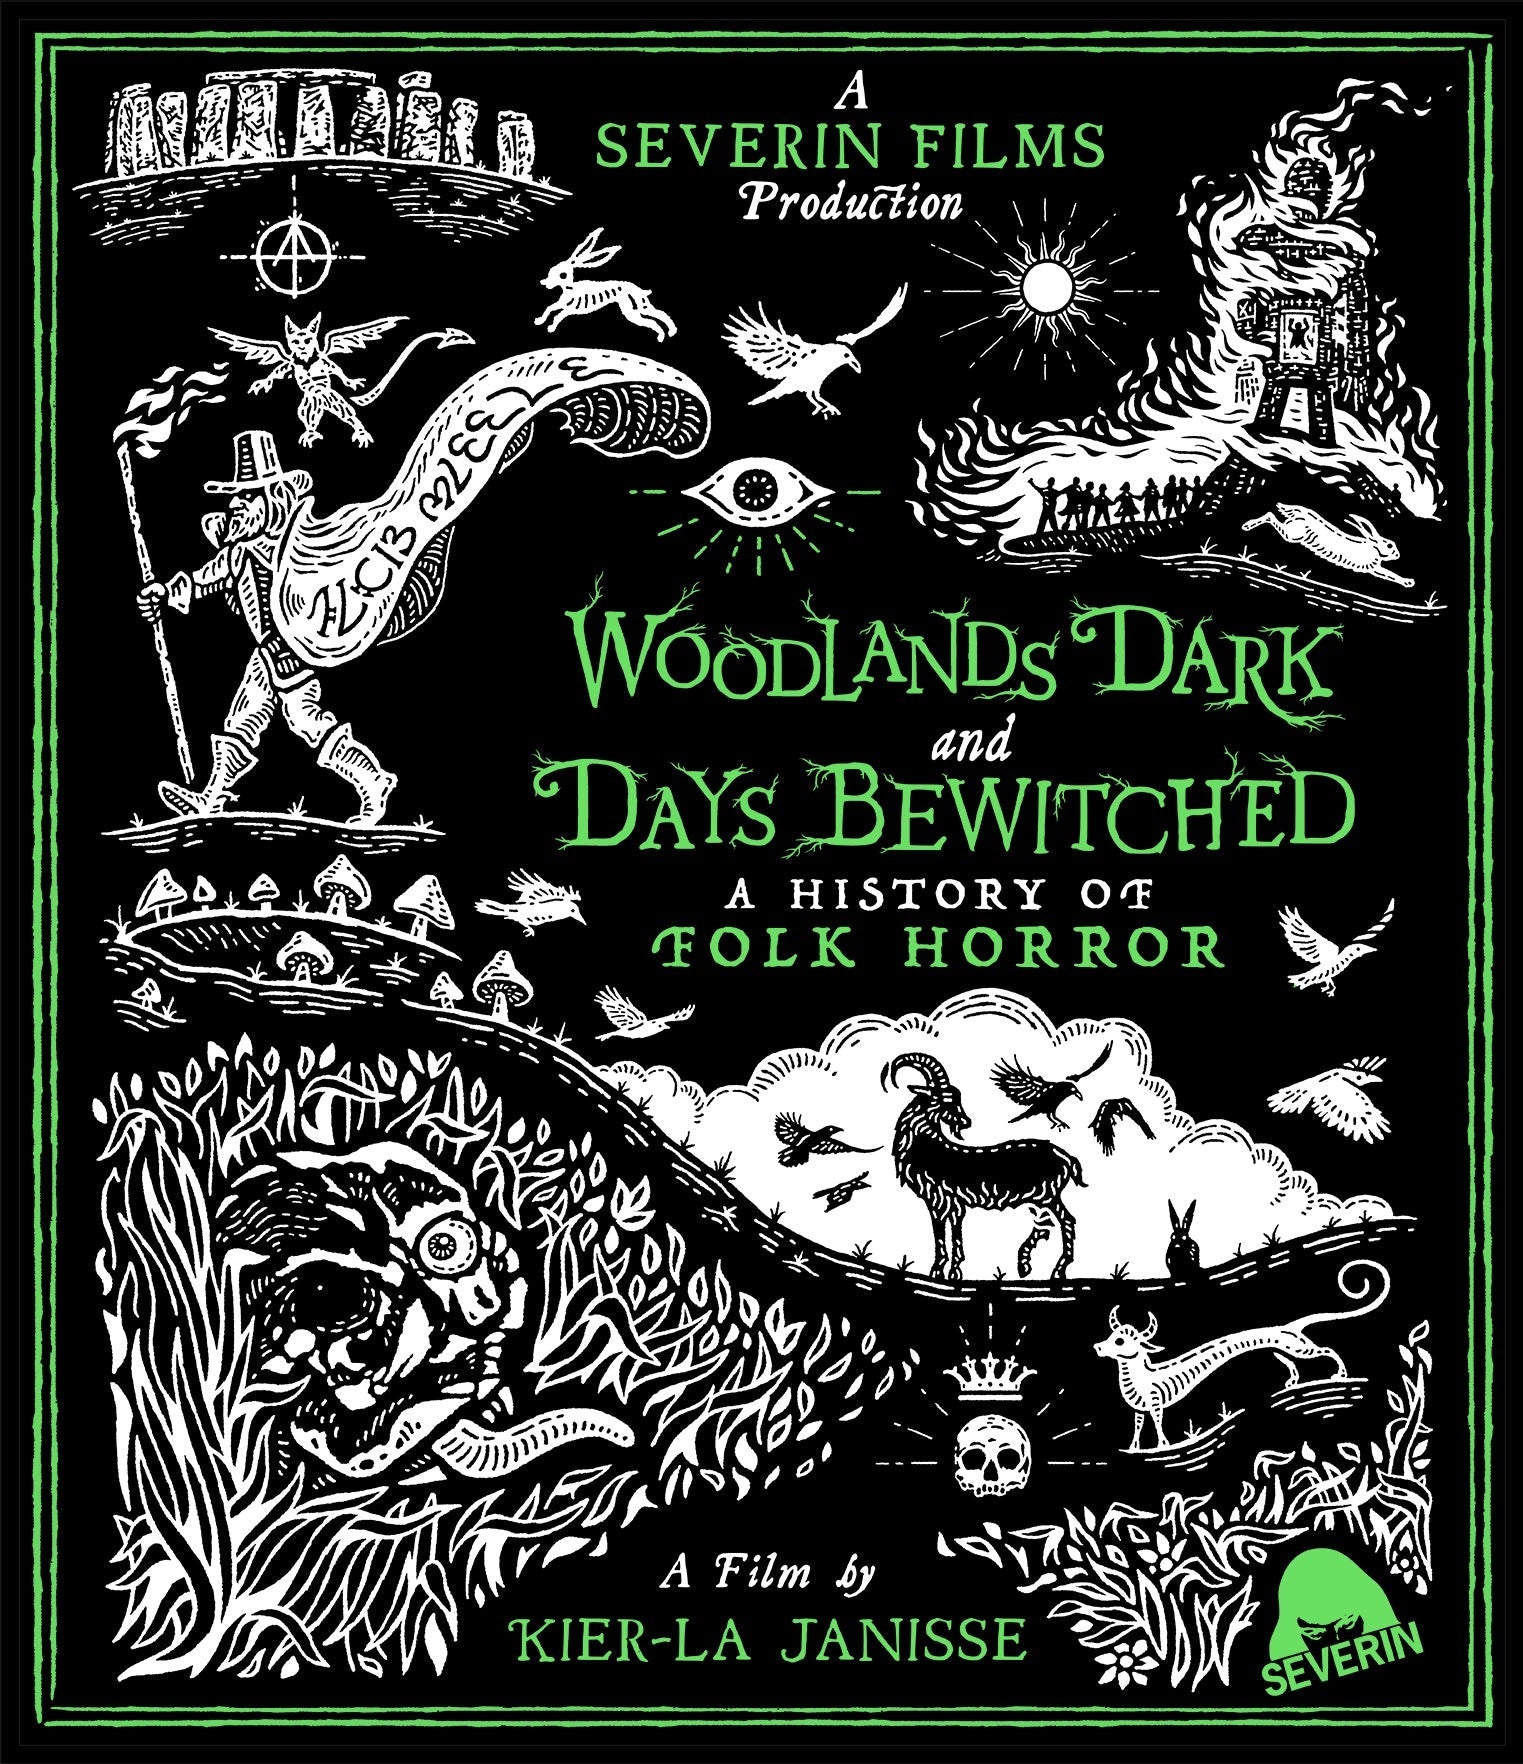 Woodlands Dark And Days Bewitched: A History Of Folk Horror Blu-Ray Blu-Ray